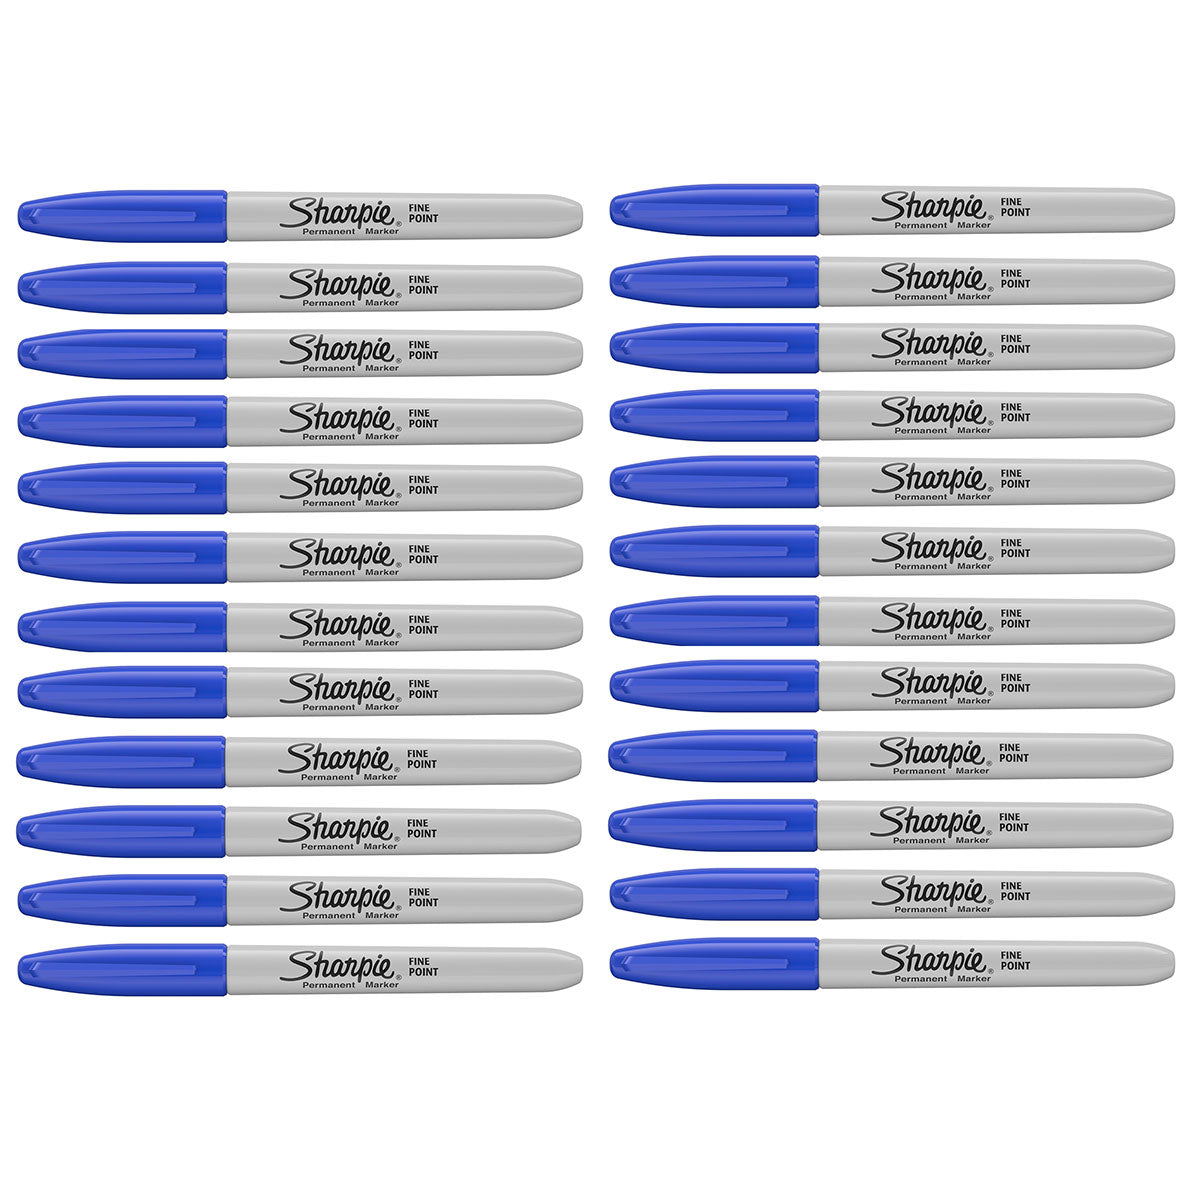 Bulk Sharpies available now at our MASSIVE online sale!